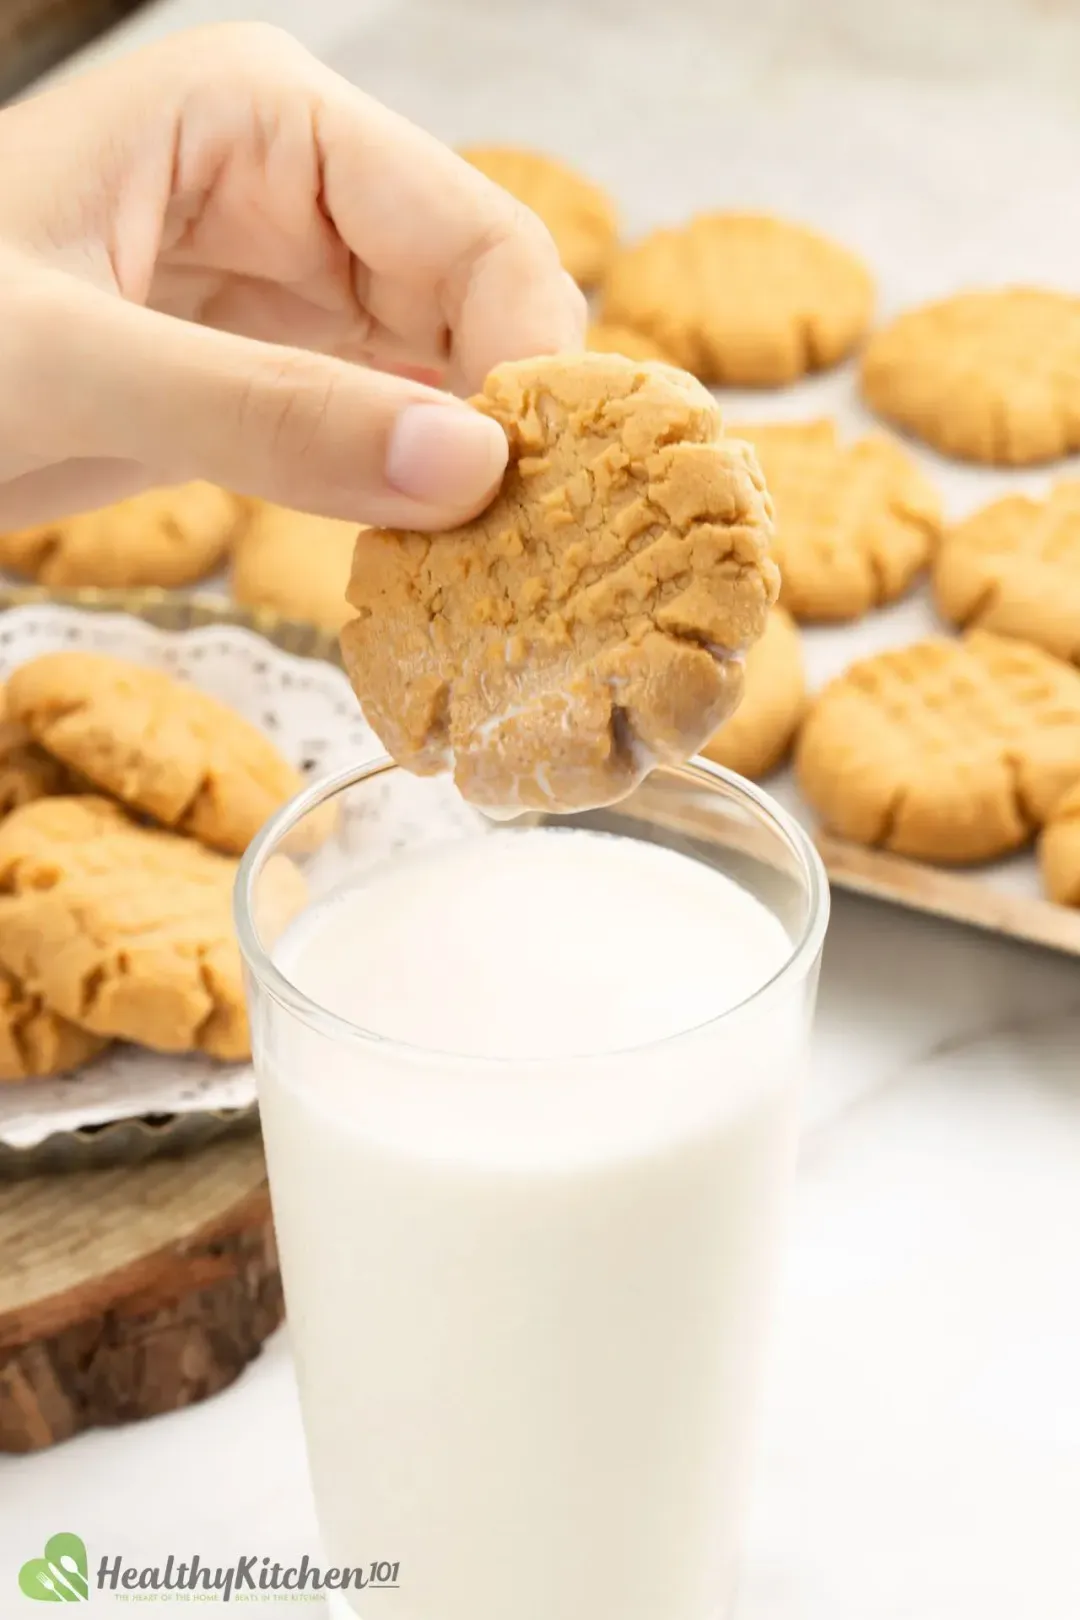 How to Store and Freeze Peanut Butter Cookies